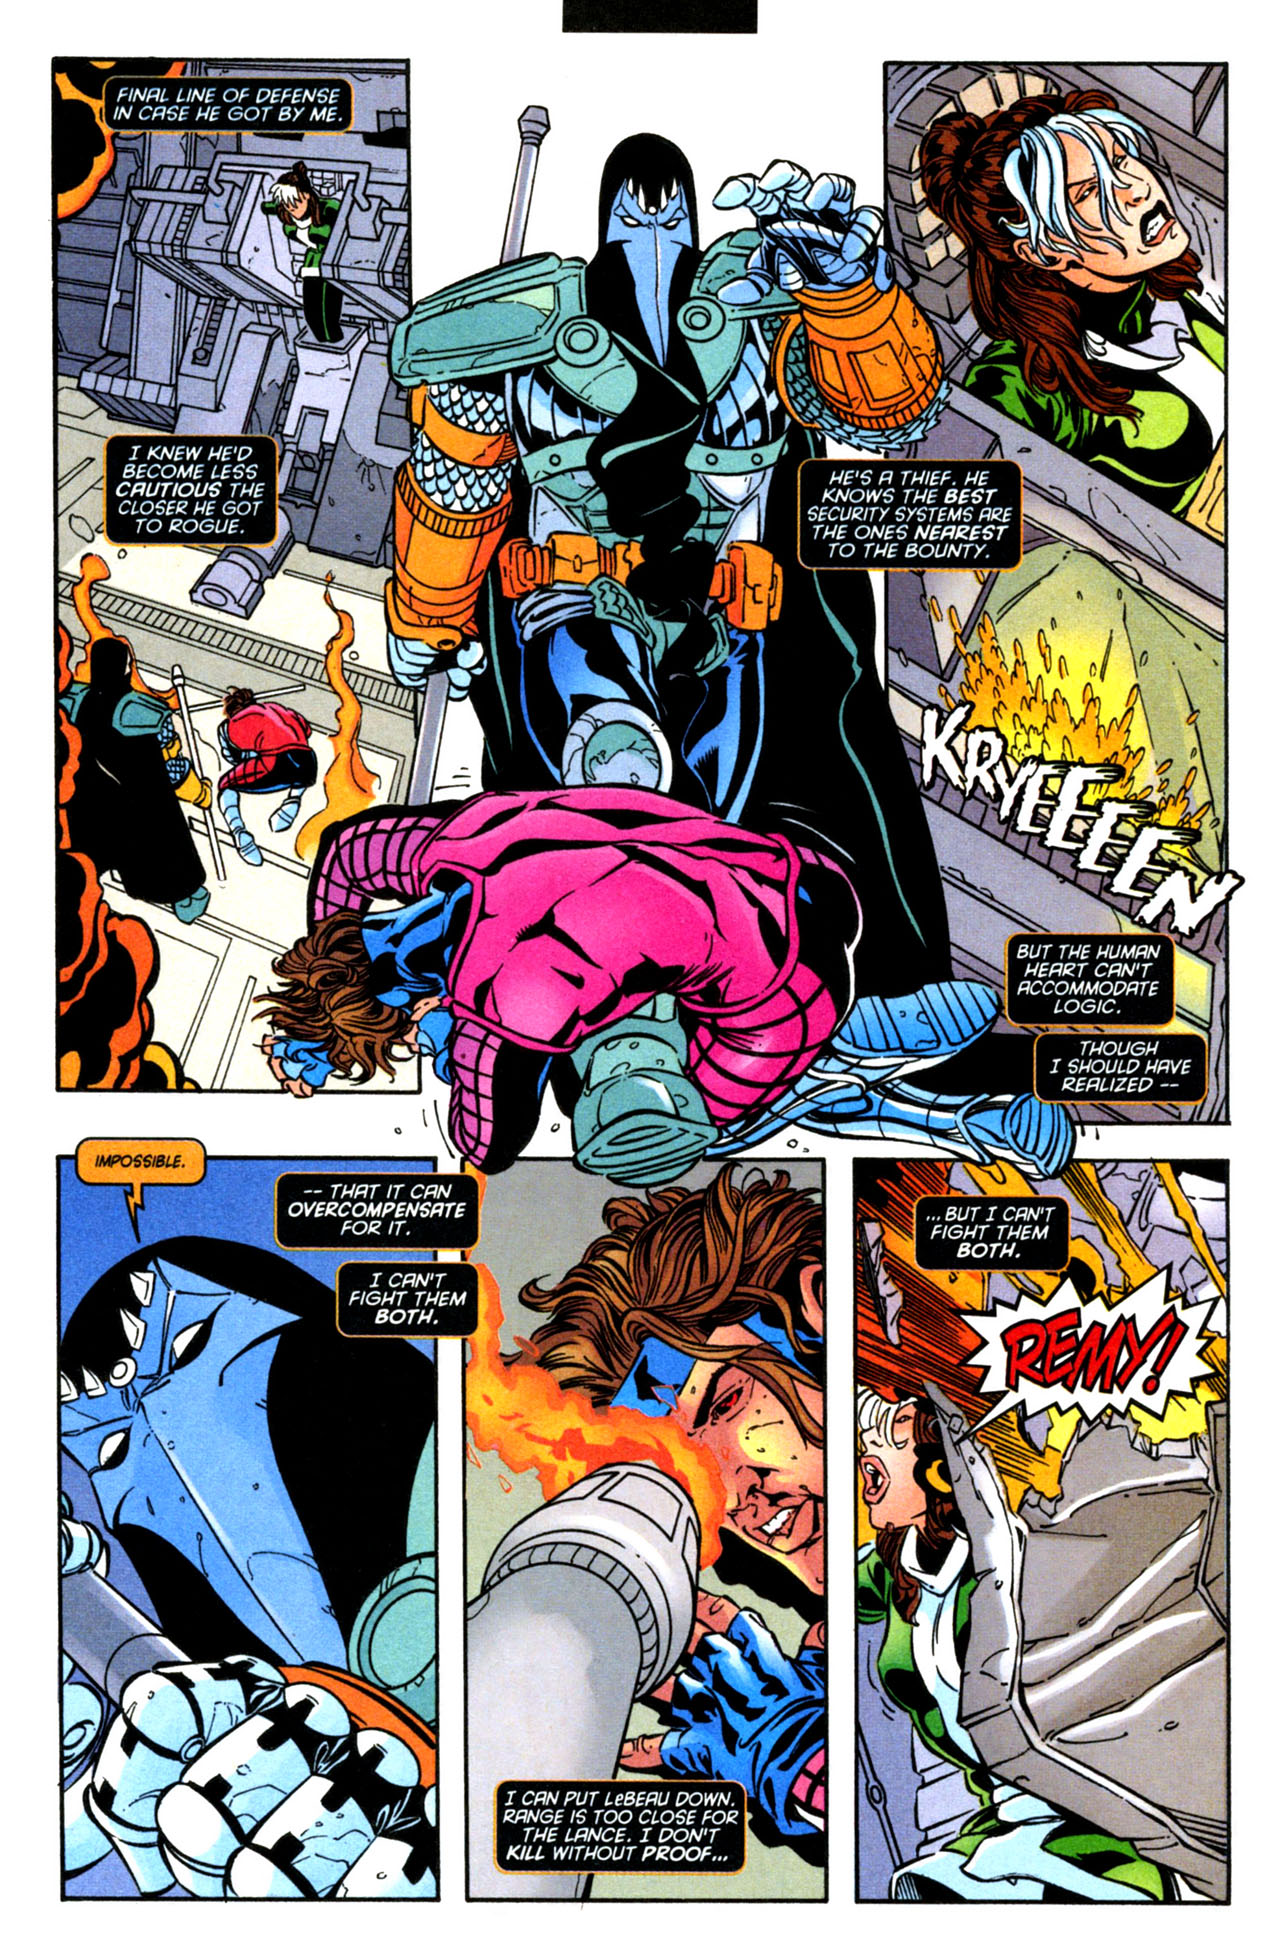 Gambit (1999) 5 Page 19